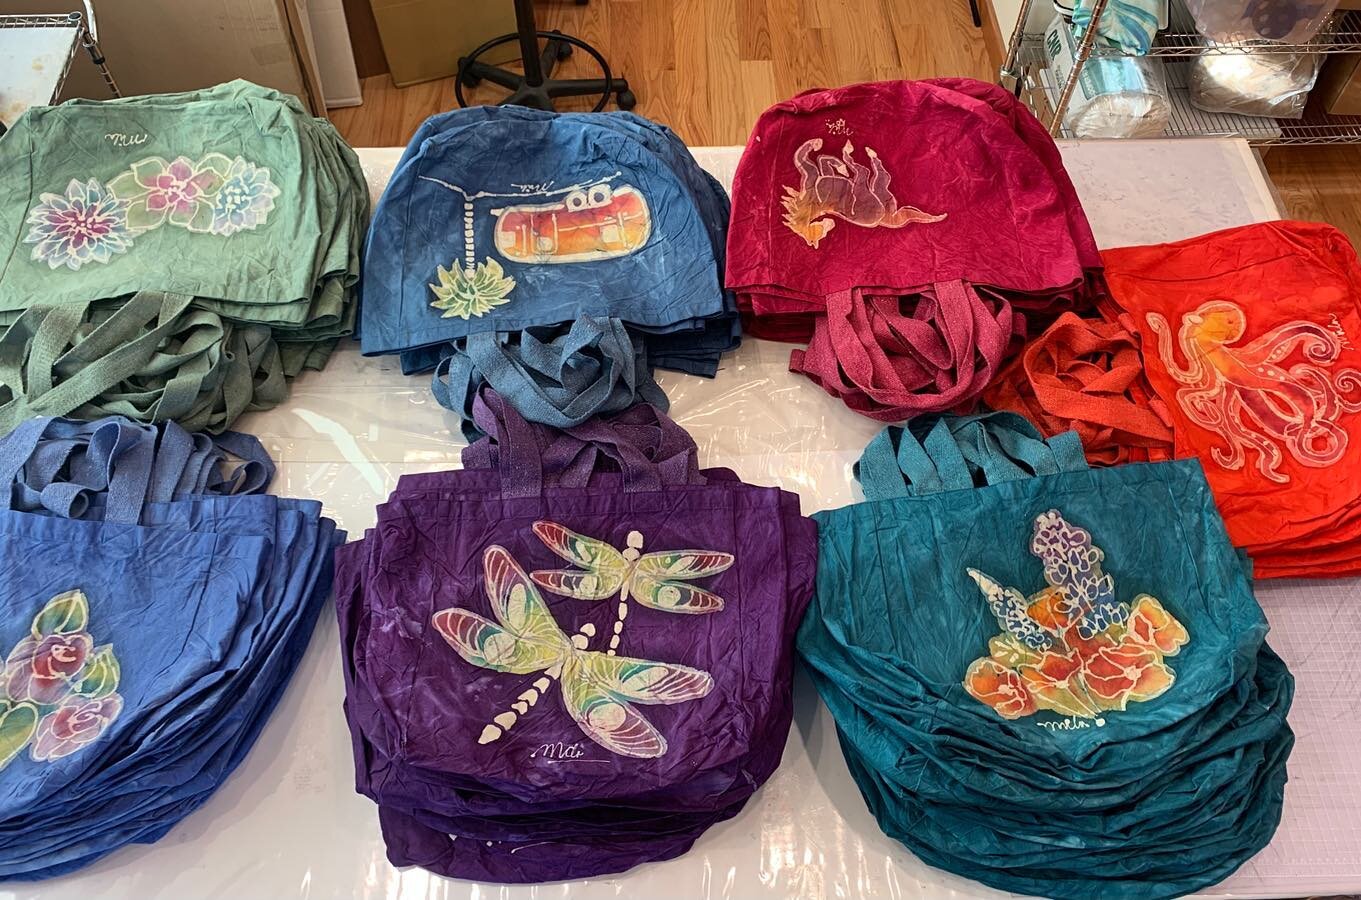 Fresh work in the studio. All ready for summer!
#batikbags #dharmatradingco #summerfestivals #batikmarketbags #colorfulbags #springcolors #organicbags